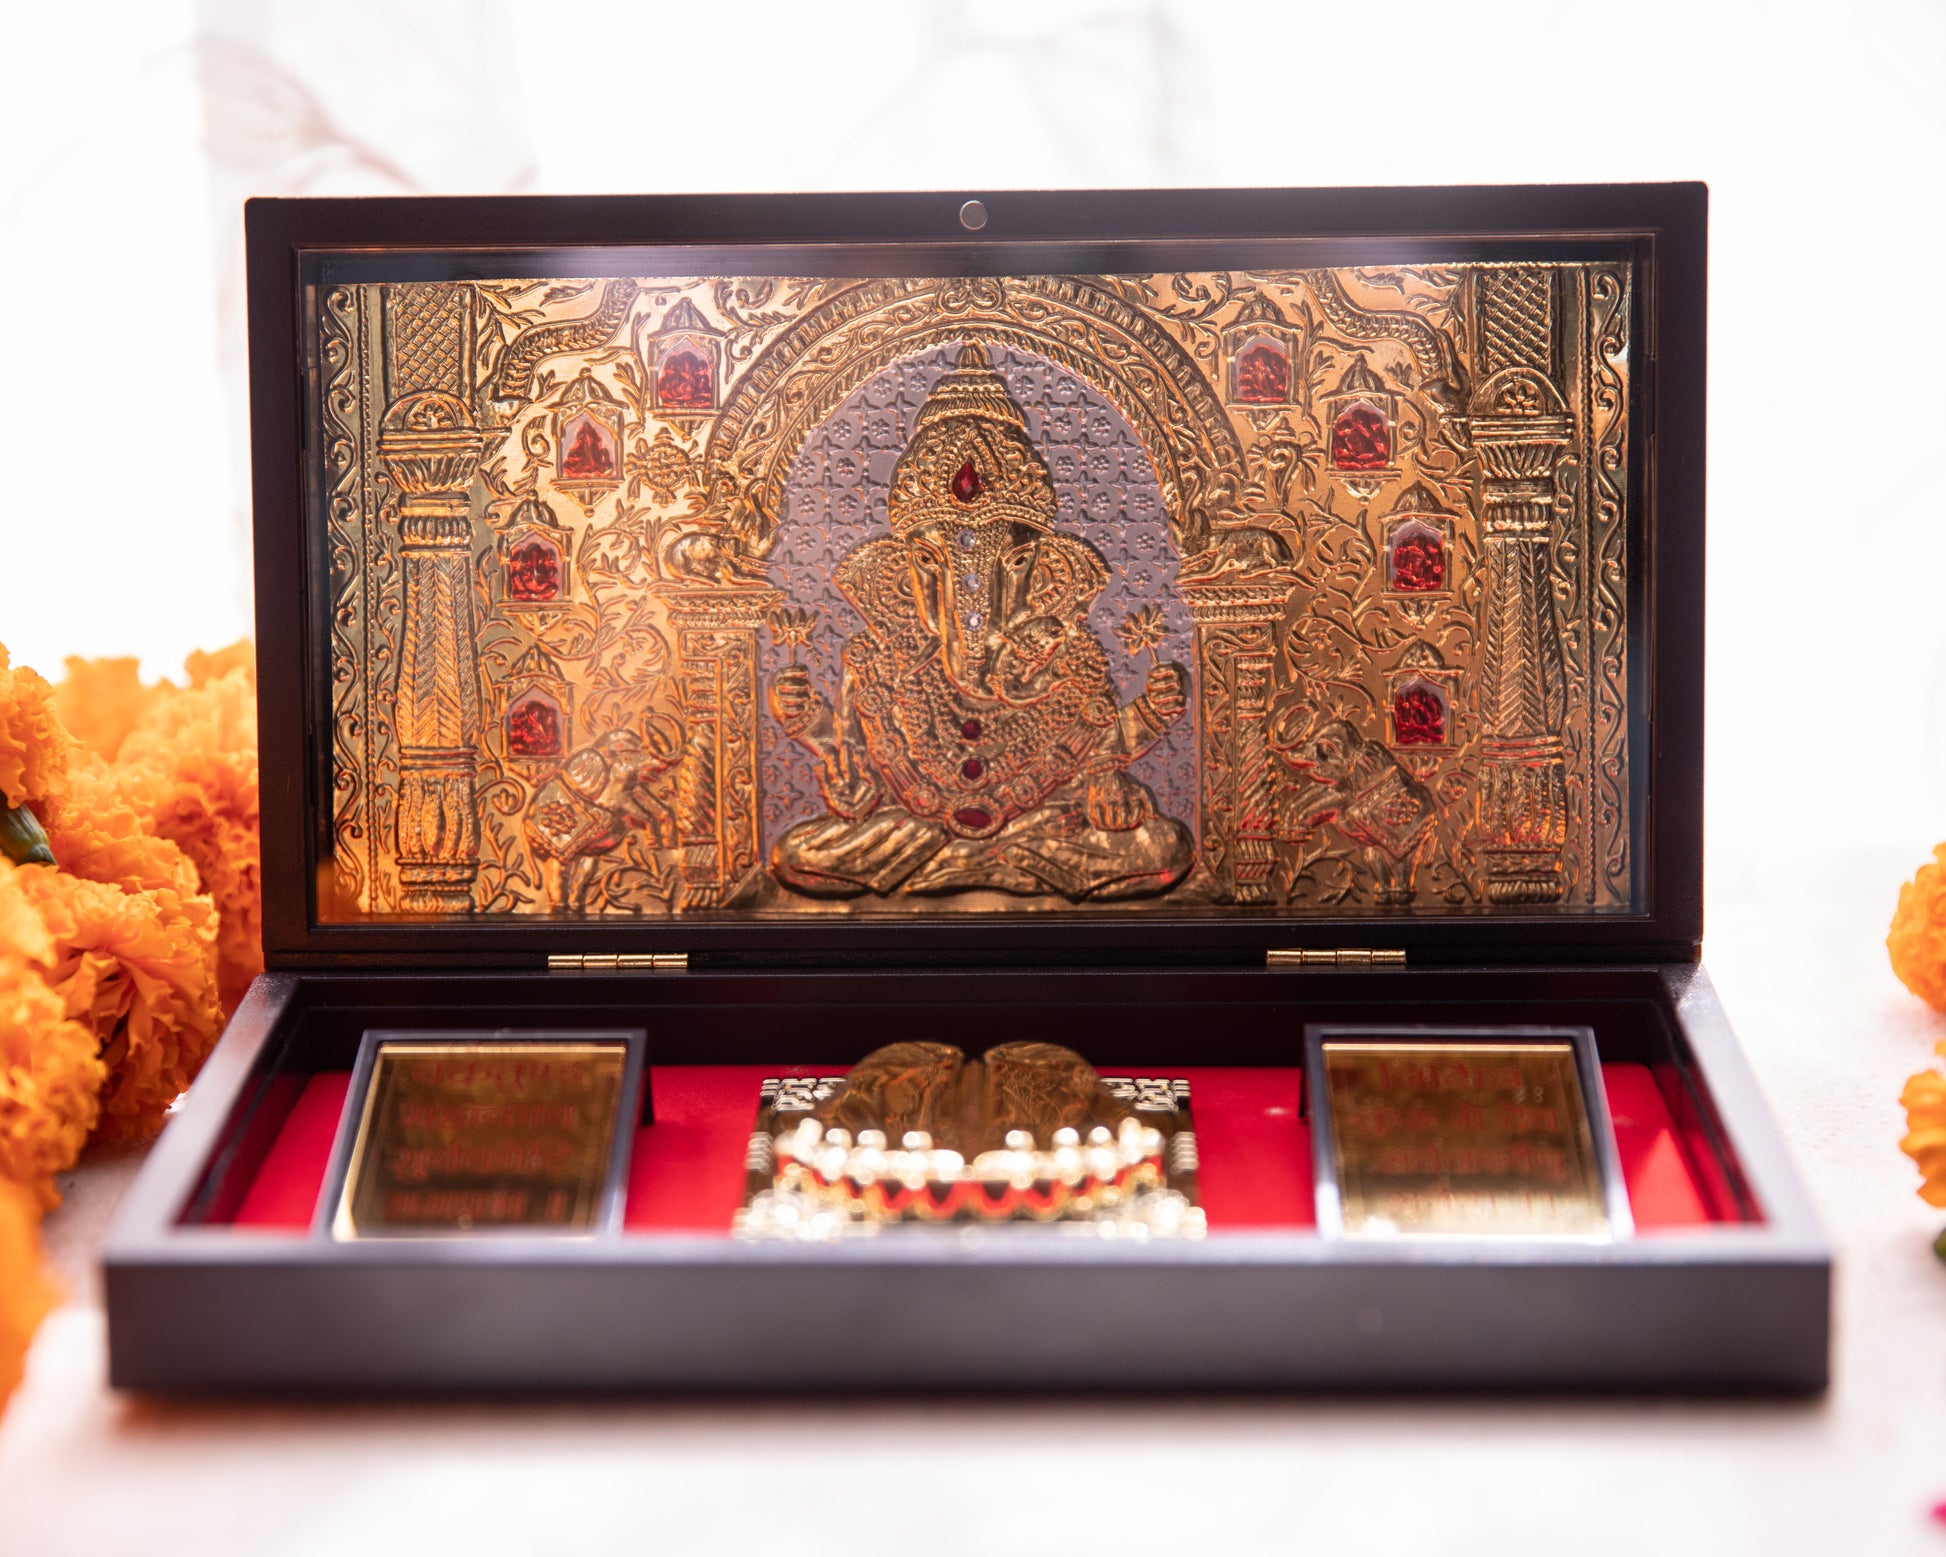 LeelaTheStore’s 24K Lord Ganesha Pooja Box - All the symbolism and imagery seen within has been wrapped in 24KT gold foil, while the box is made of wood.